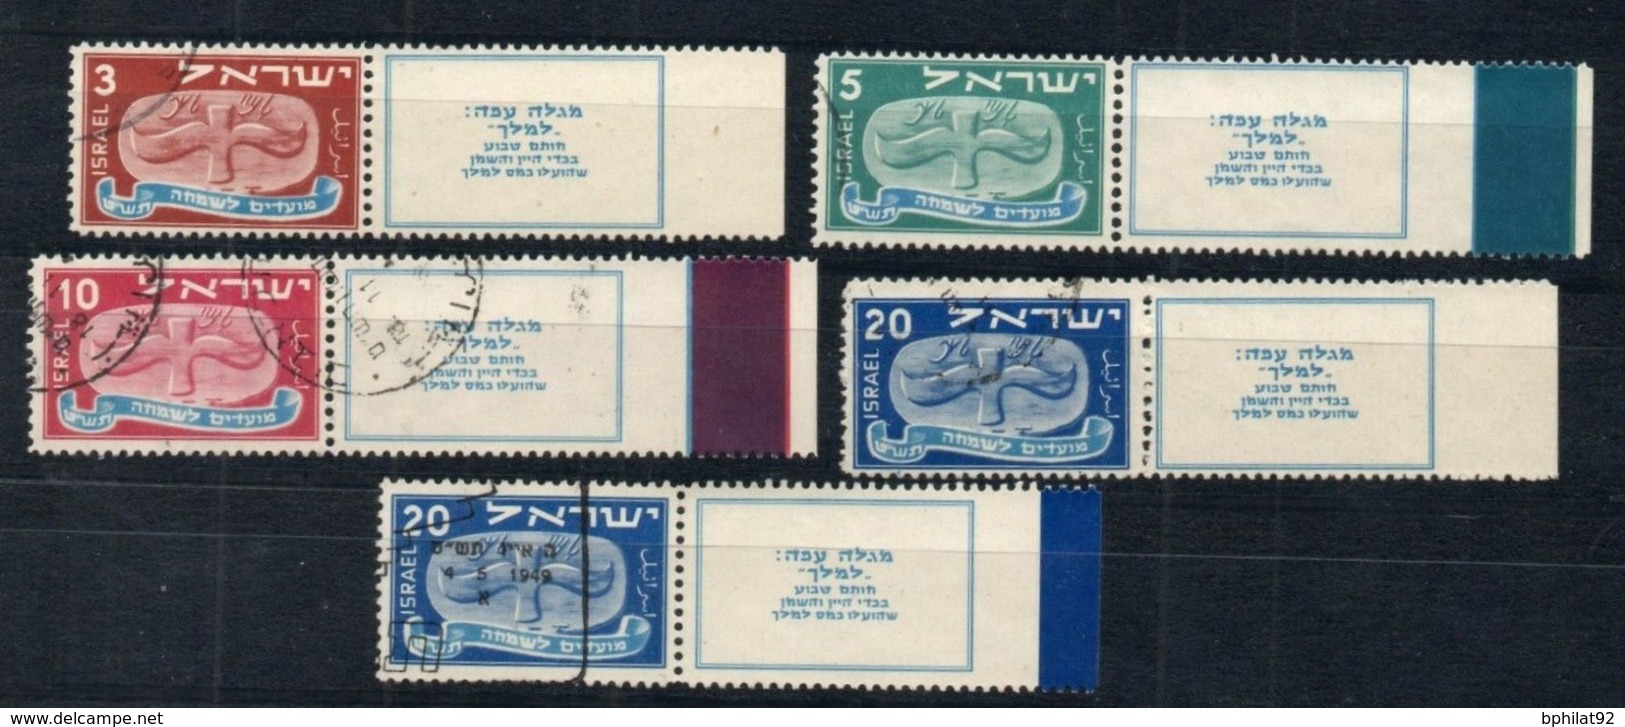 !!! PRIX FIXE : ISRAEL, SERIE N°10/14 OBLITEREE AVEC TABS COMPLETS - Used Stamps (with Tabs)